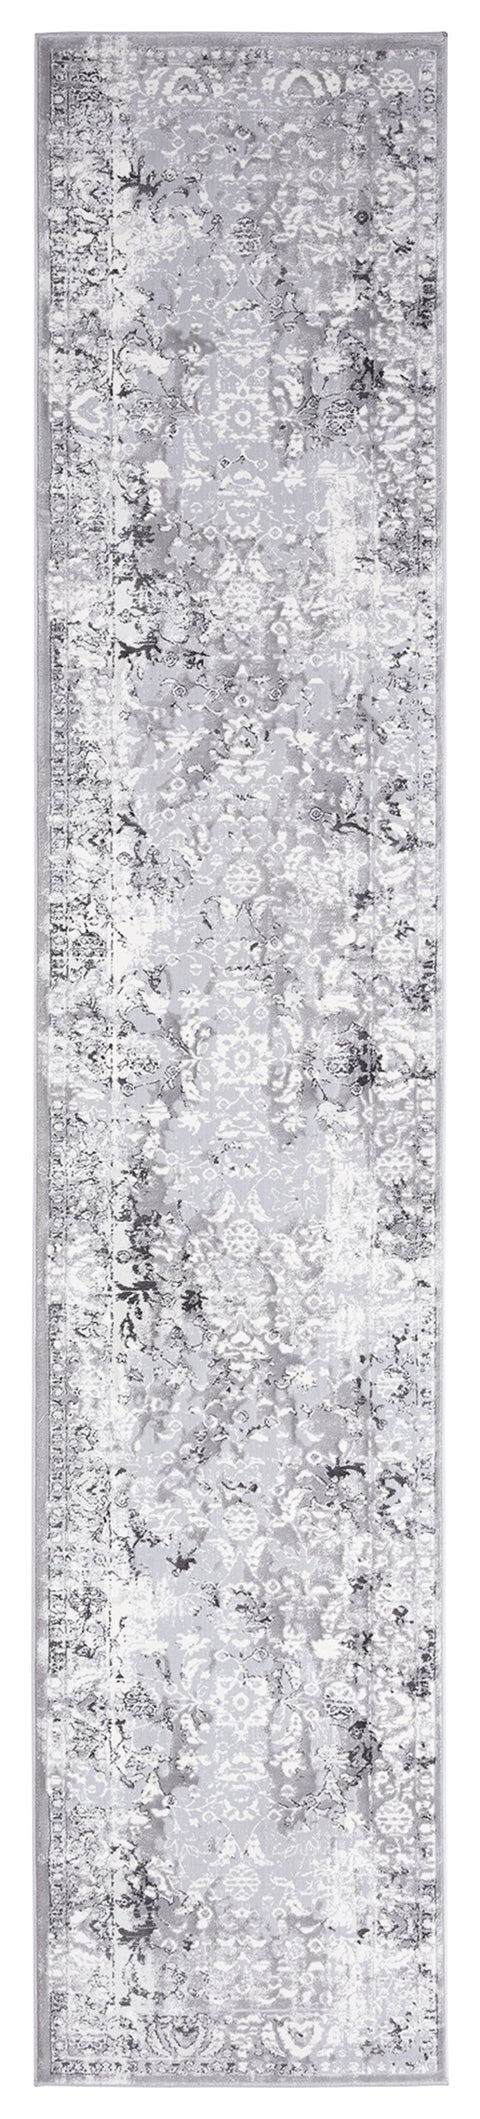 Evryn Charcoal Grey And Ivory Distressed Floral Runner Rug